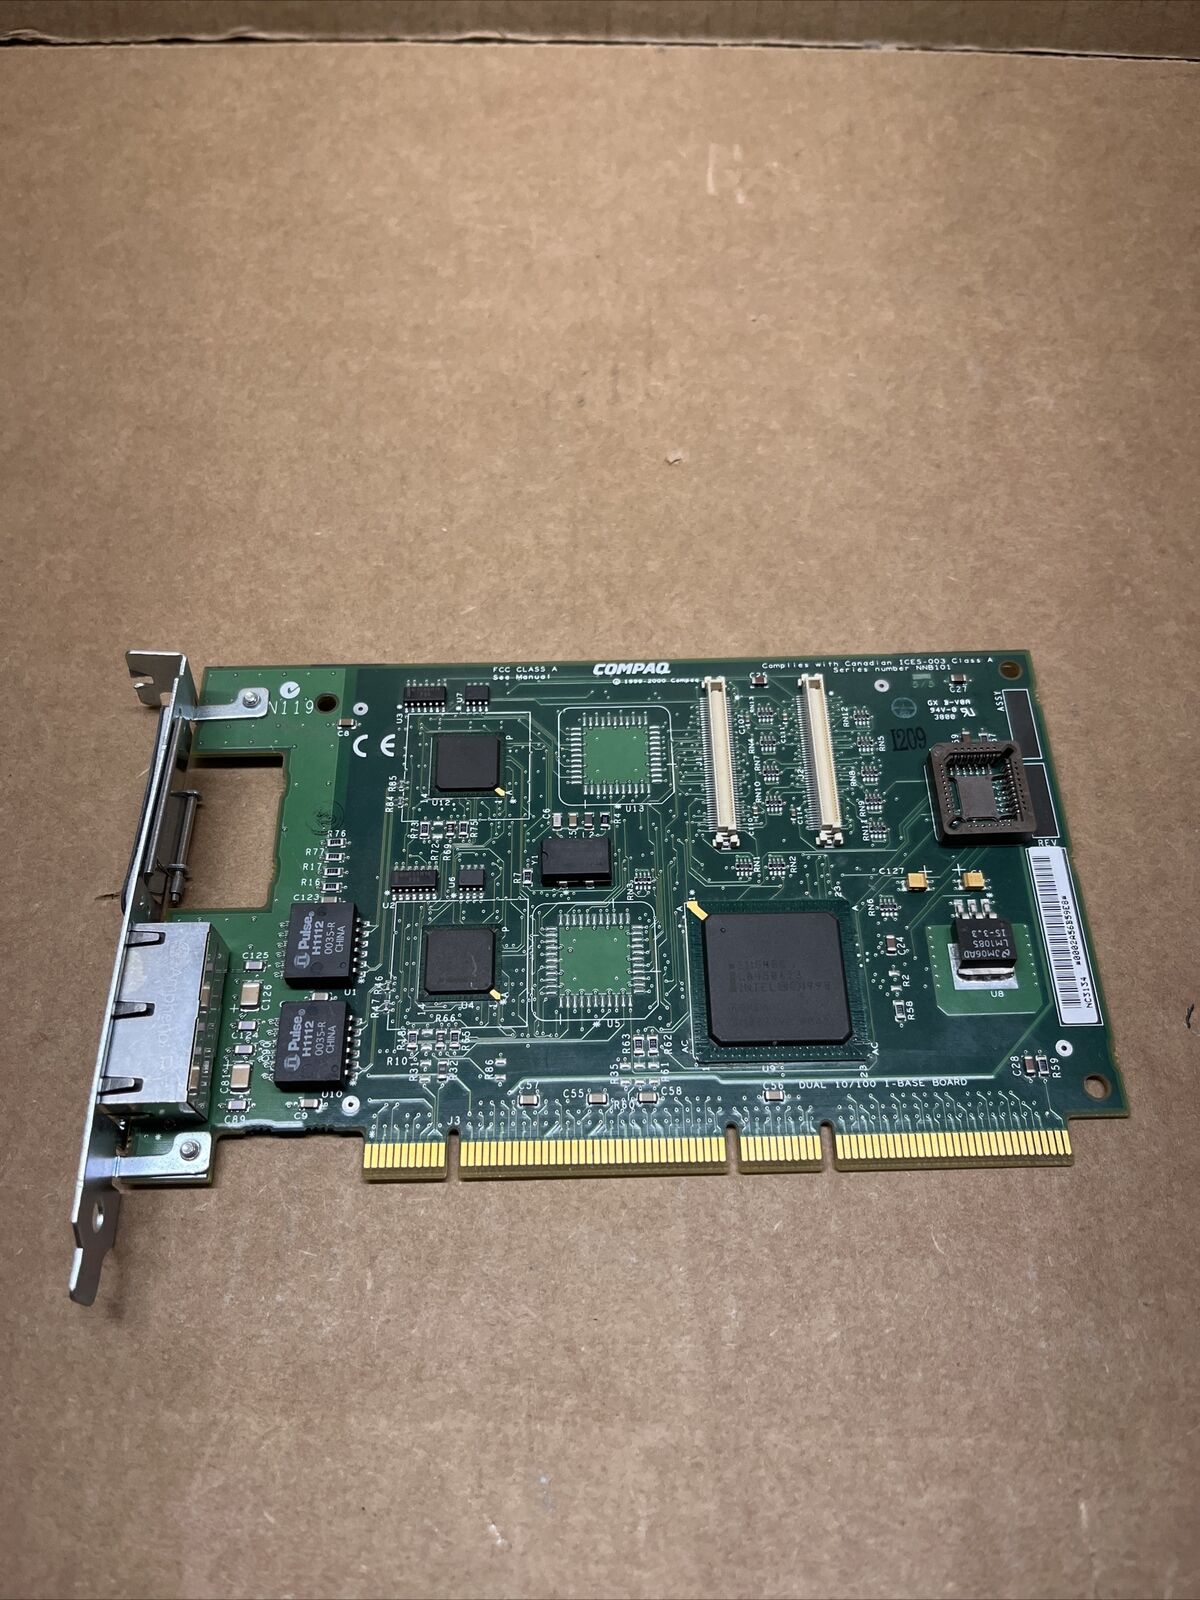 161105-001 Compaq NC3134 PCI dual channel Fast Ethernet Network Interface Card